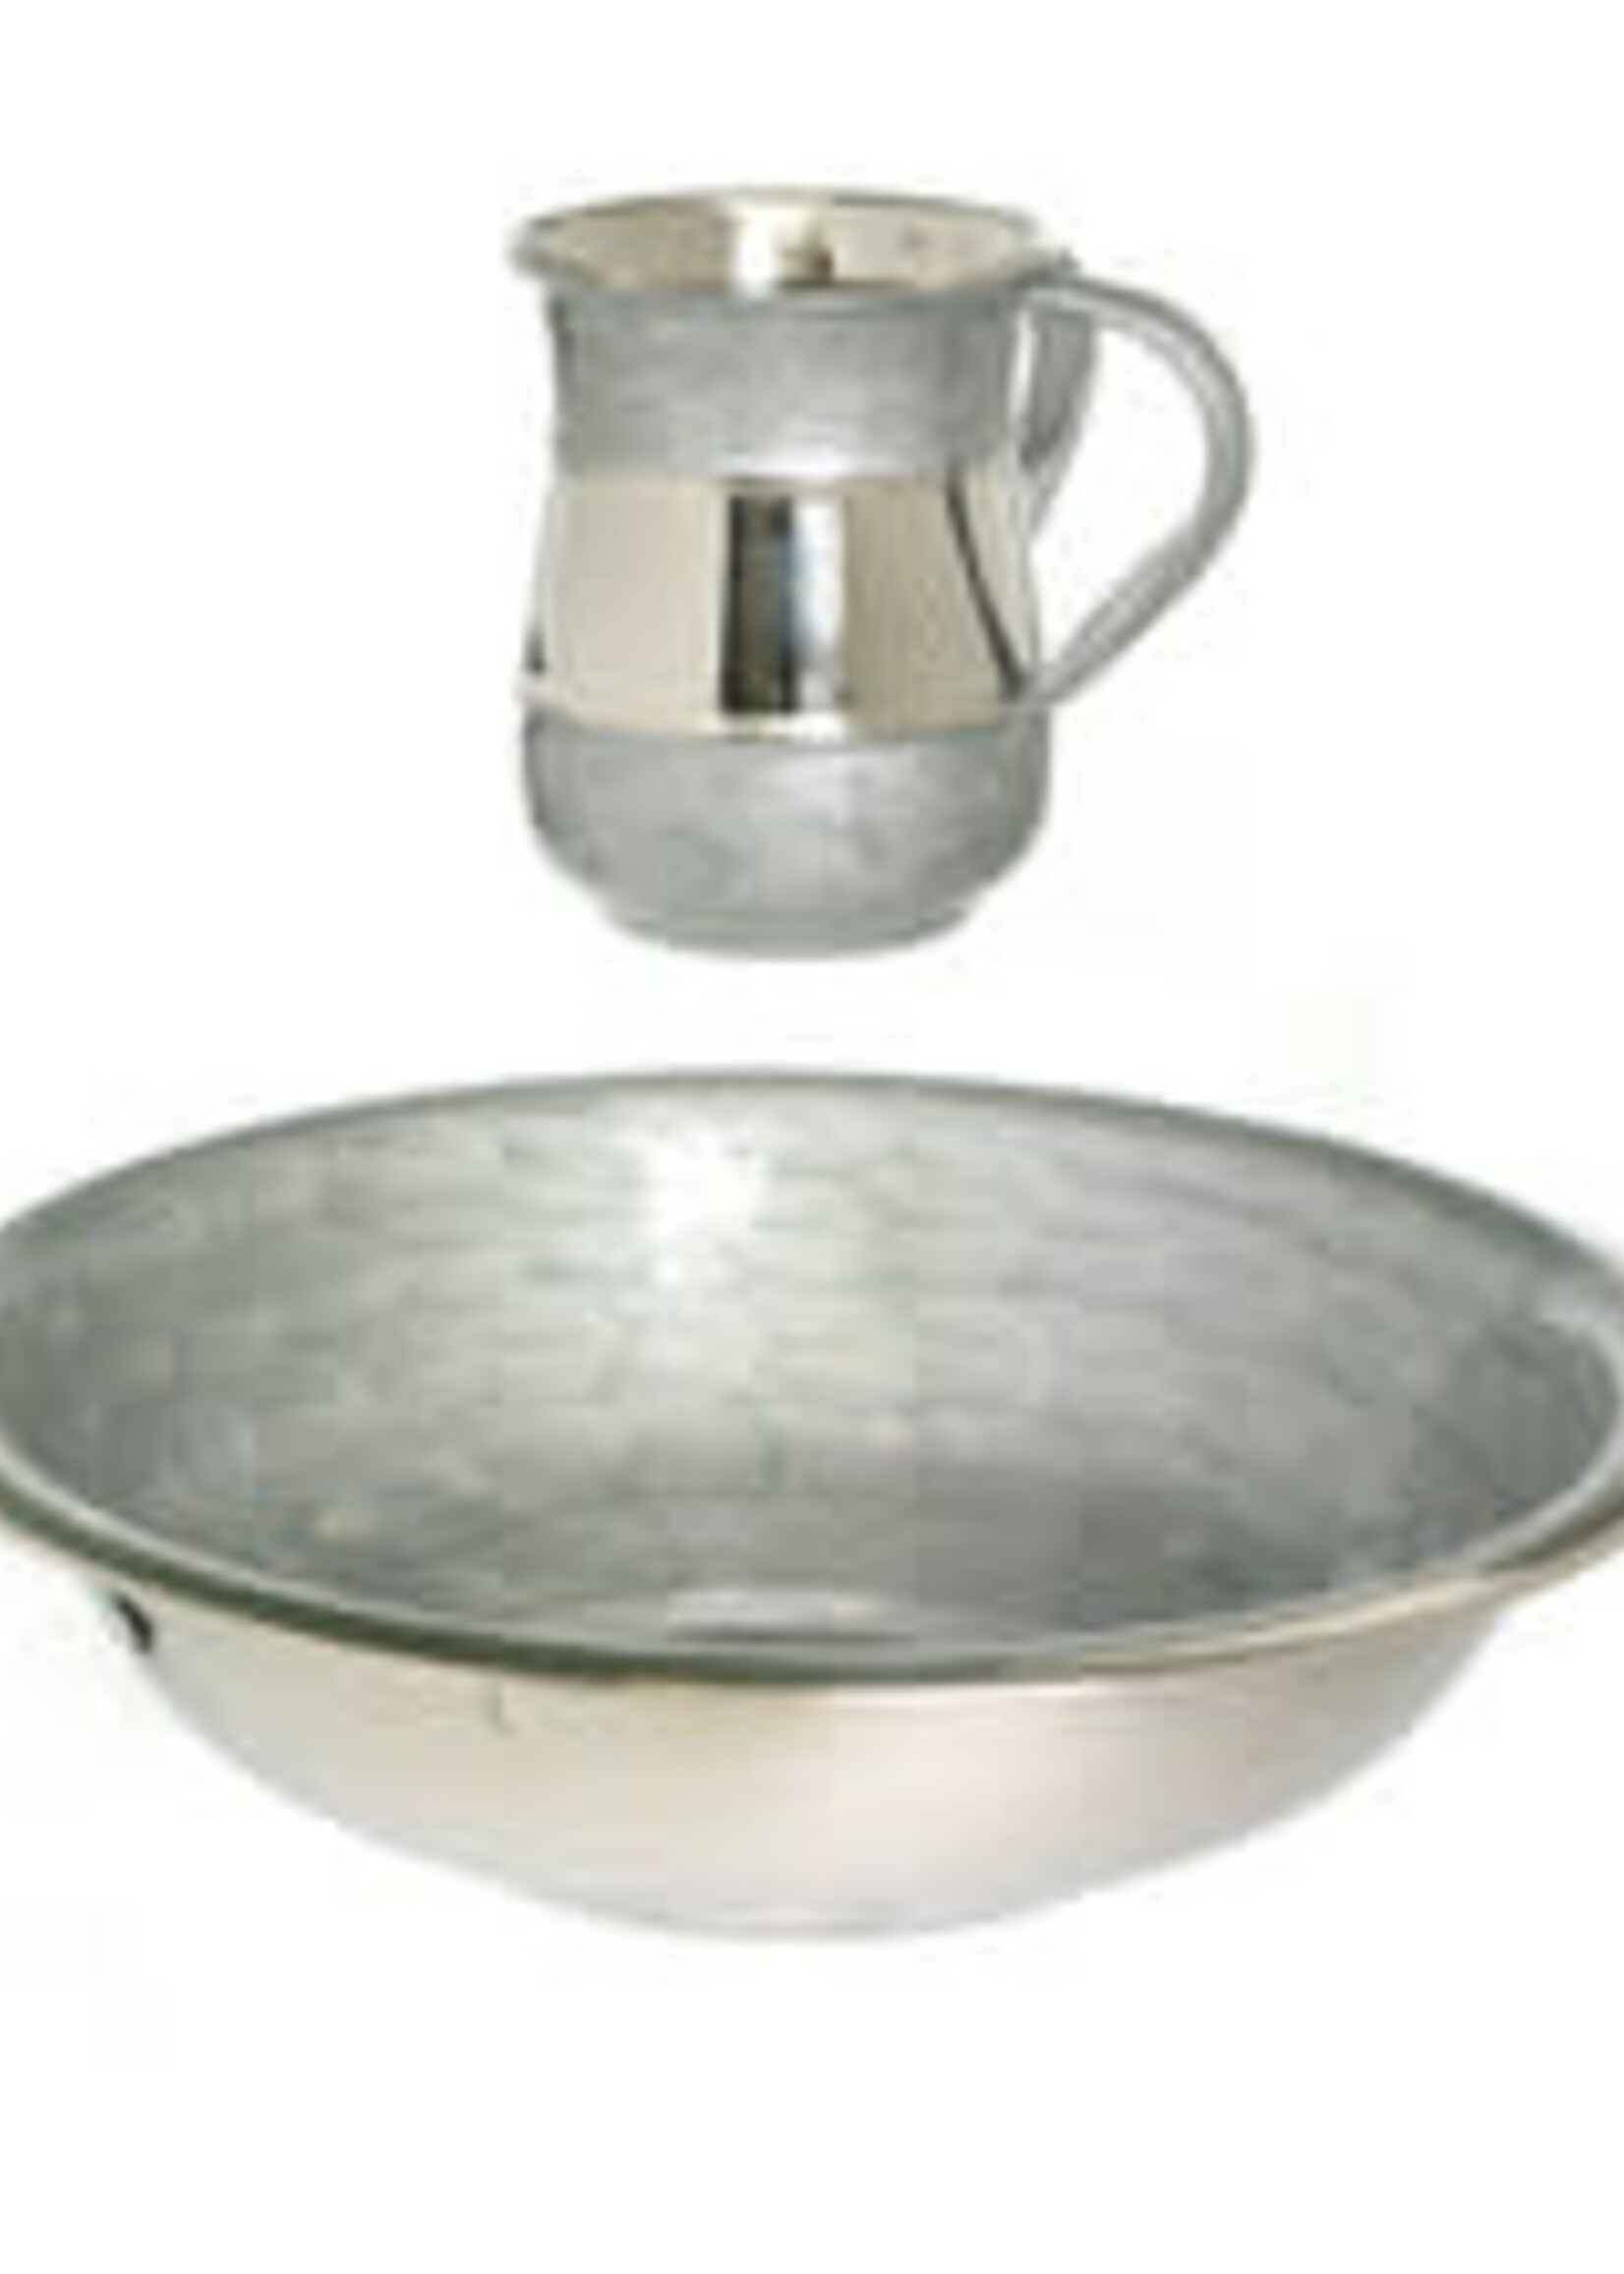 Stainless Steel Enamel Wash Cup and Bowl Set- Silver/Gray (WC-X4760